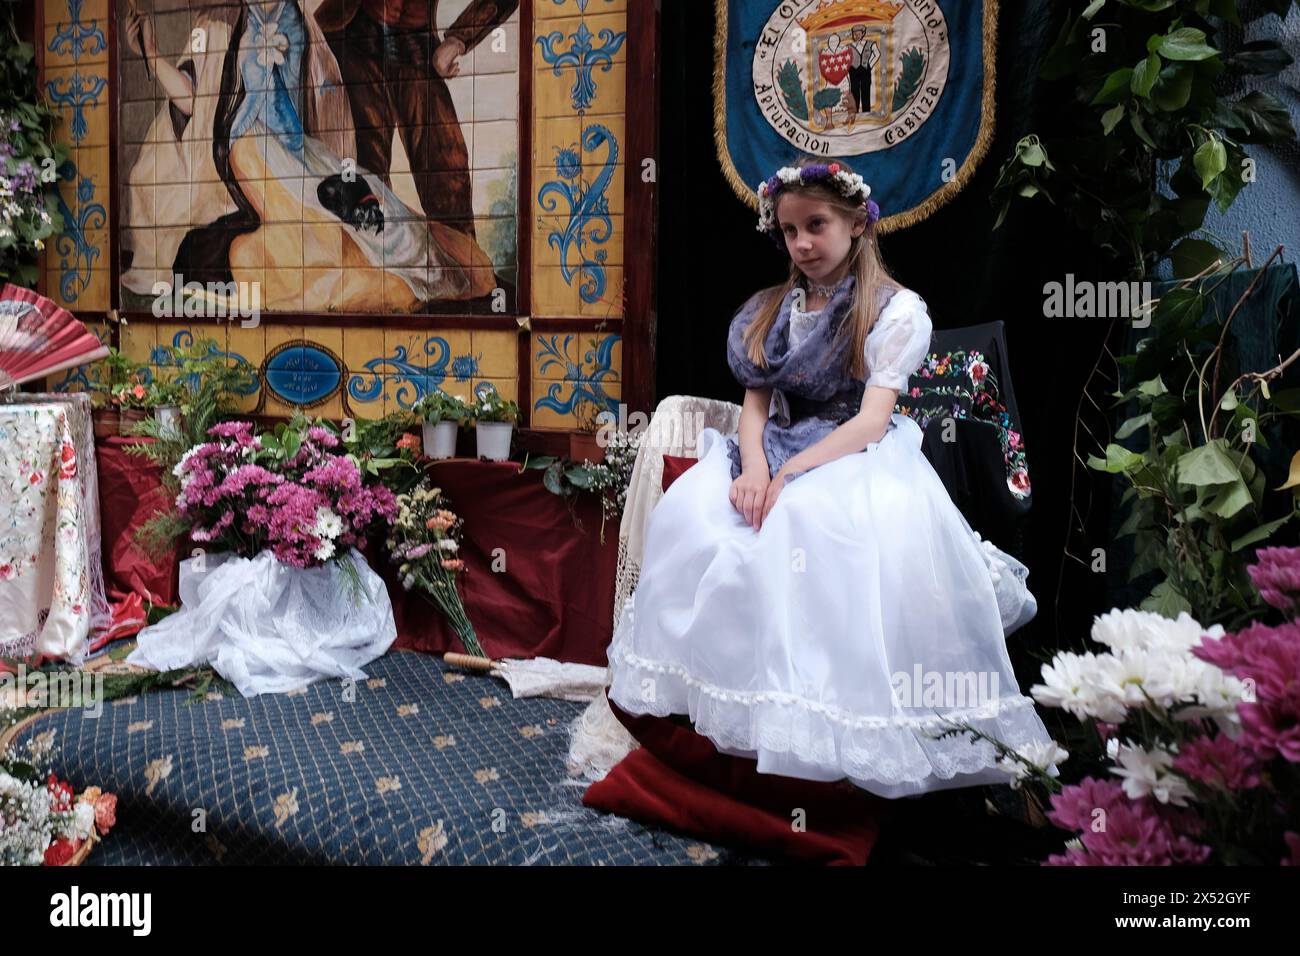 Celebration of 'La Maya' refers to girls sitting on an altar adorned with flowers to mark the arrival of spring, this tradition dates back to medieval Stock Photo